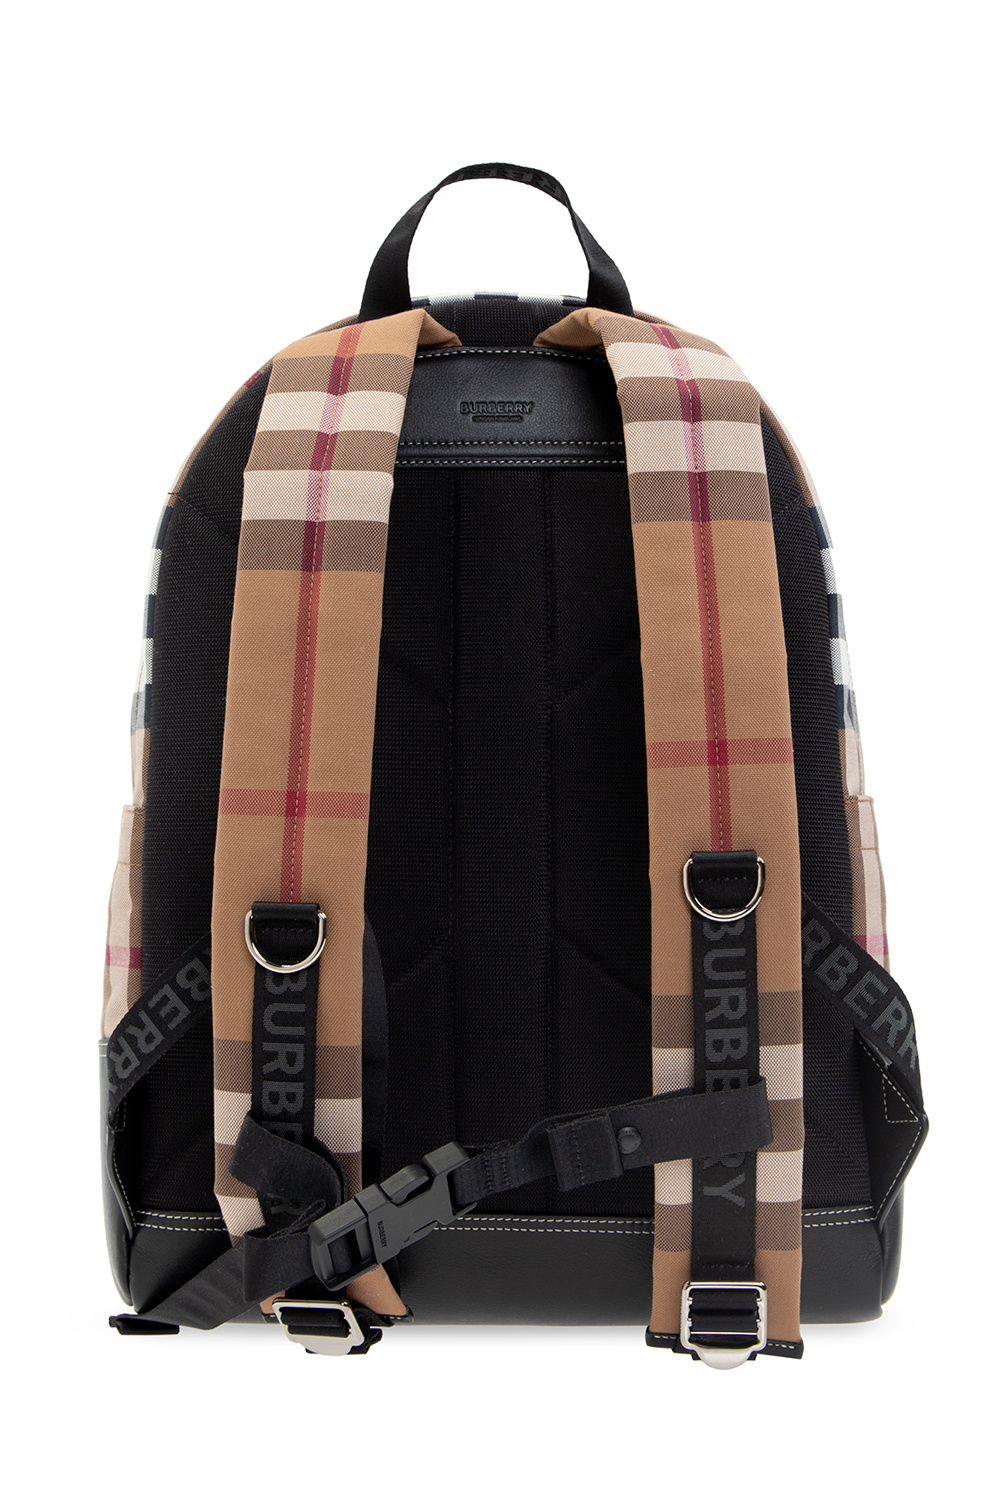 Burberry Large Jack Check Cotton Canvas Backpack in Brown for Men